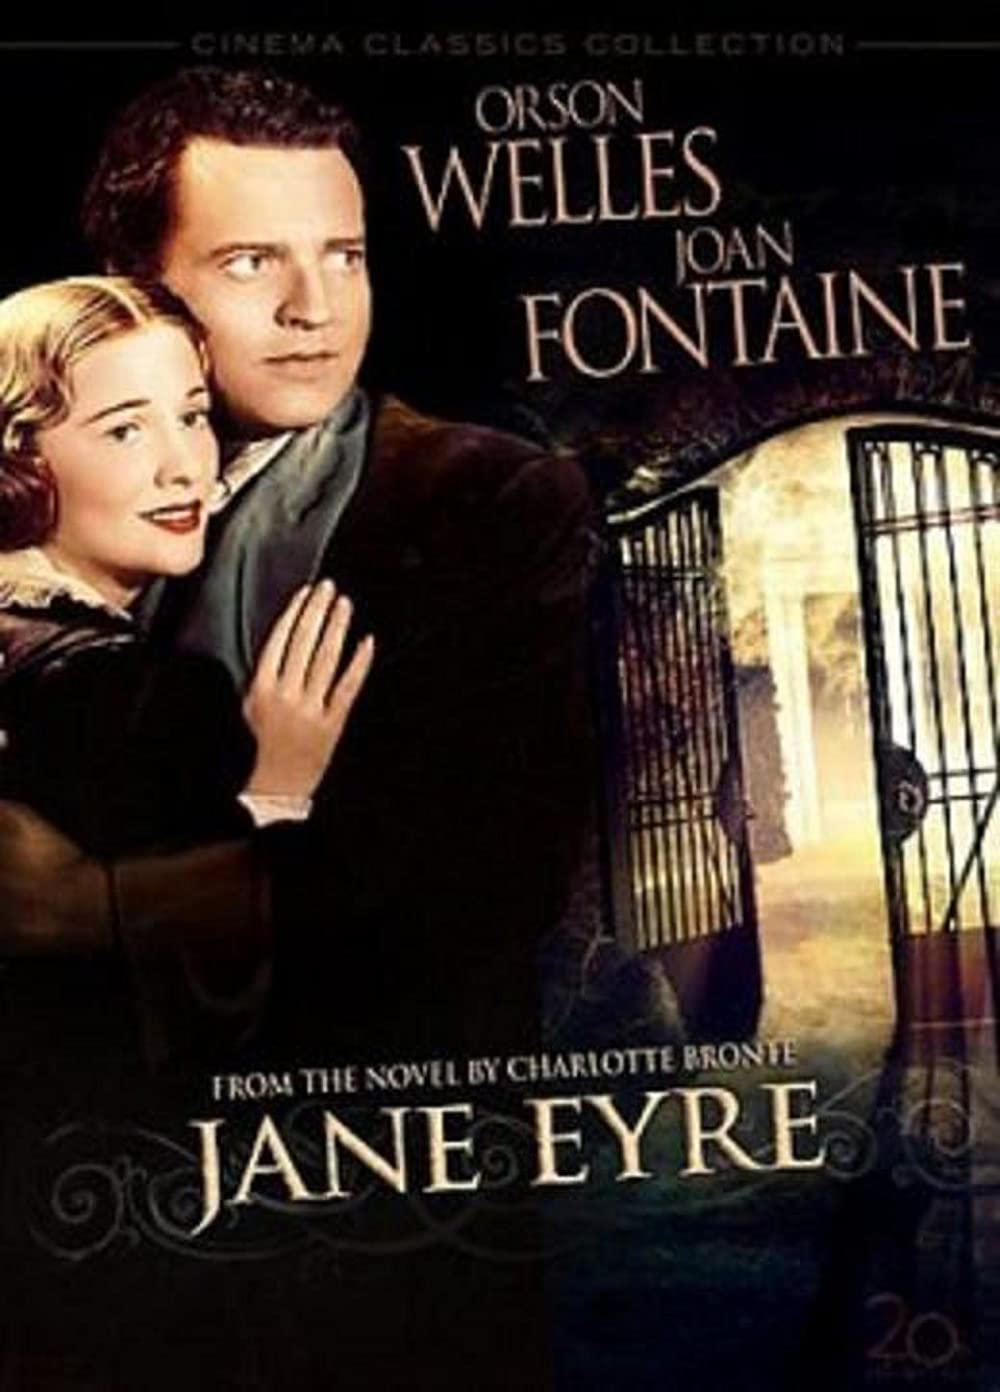 Download Locked in the Tower: The Men Behind Jane Eyre Movie | Locked In The Tower: The Men Behind Jane Eyre Online